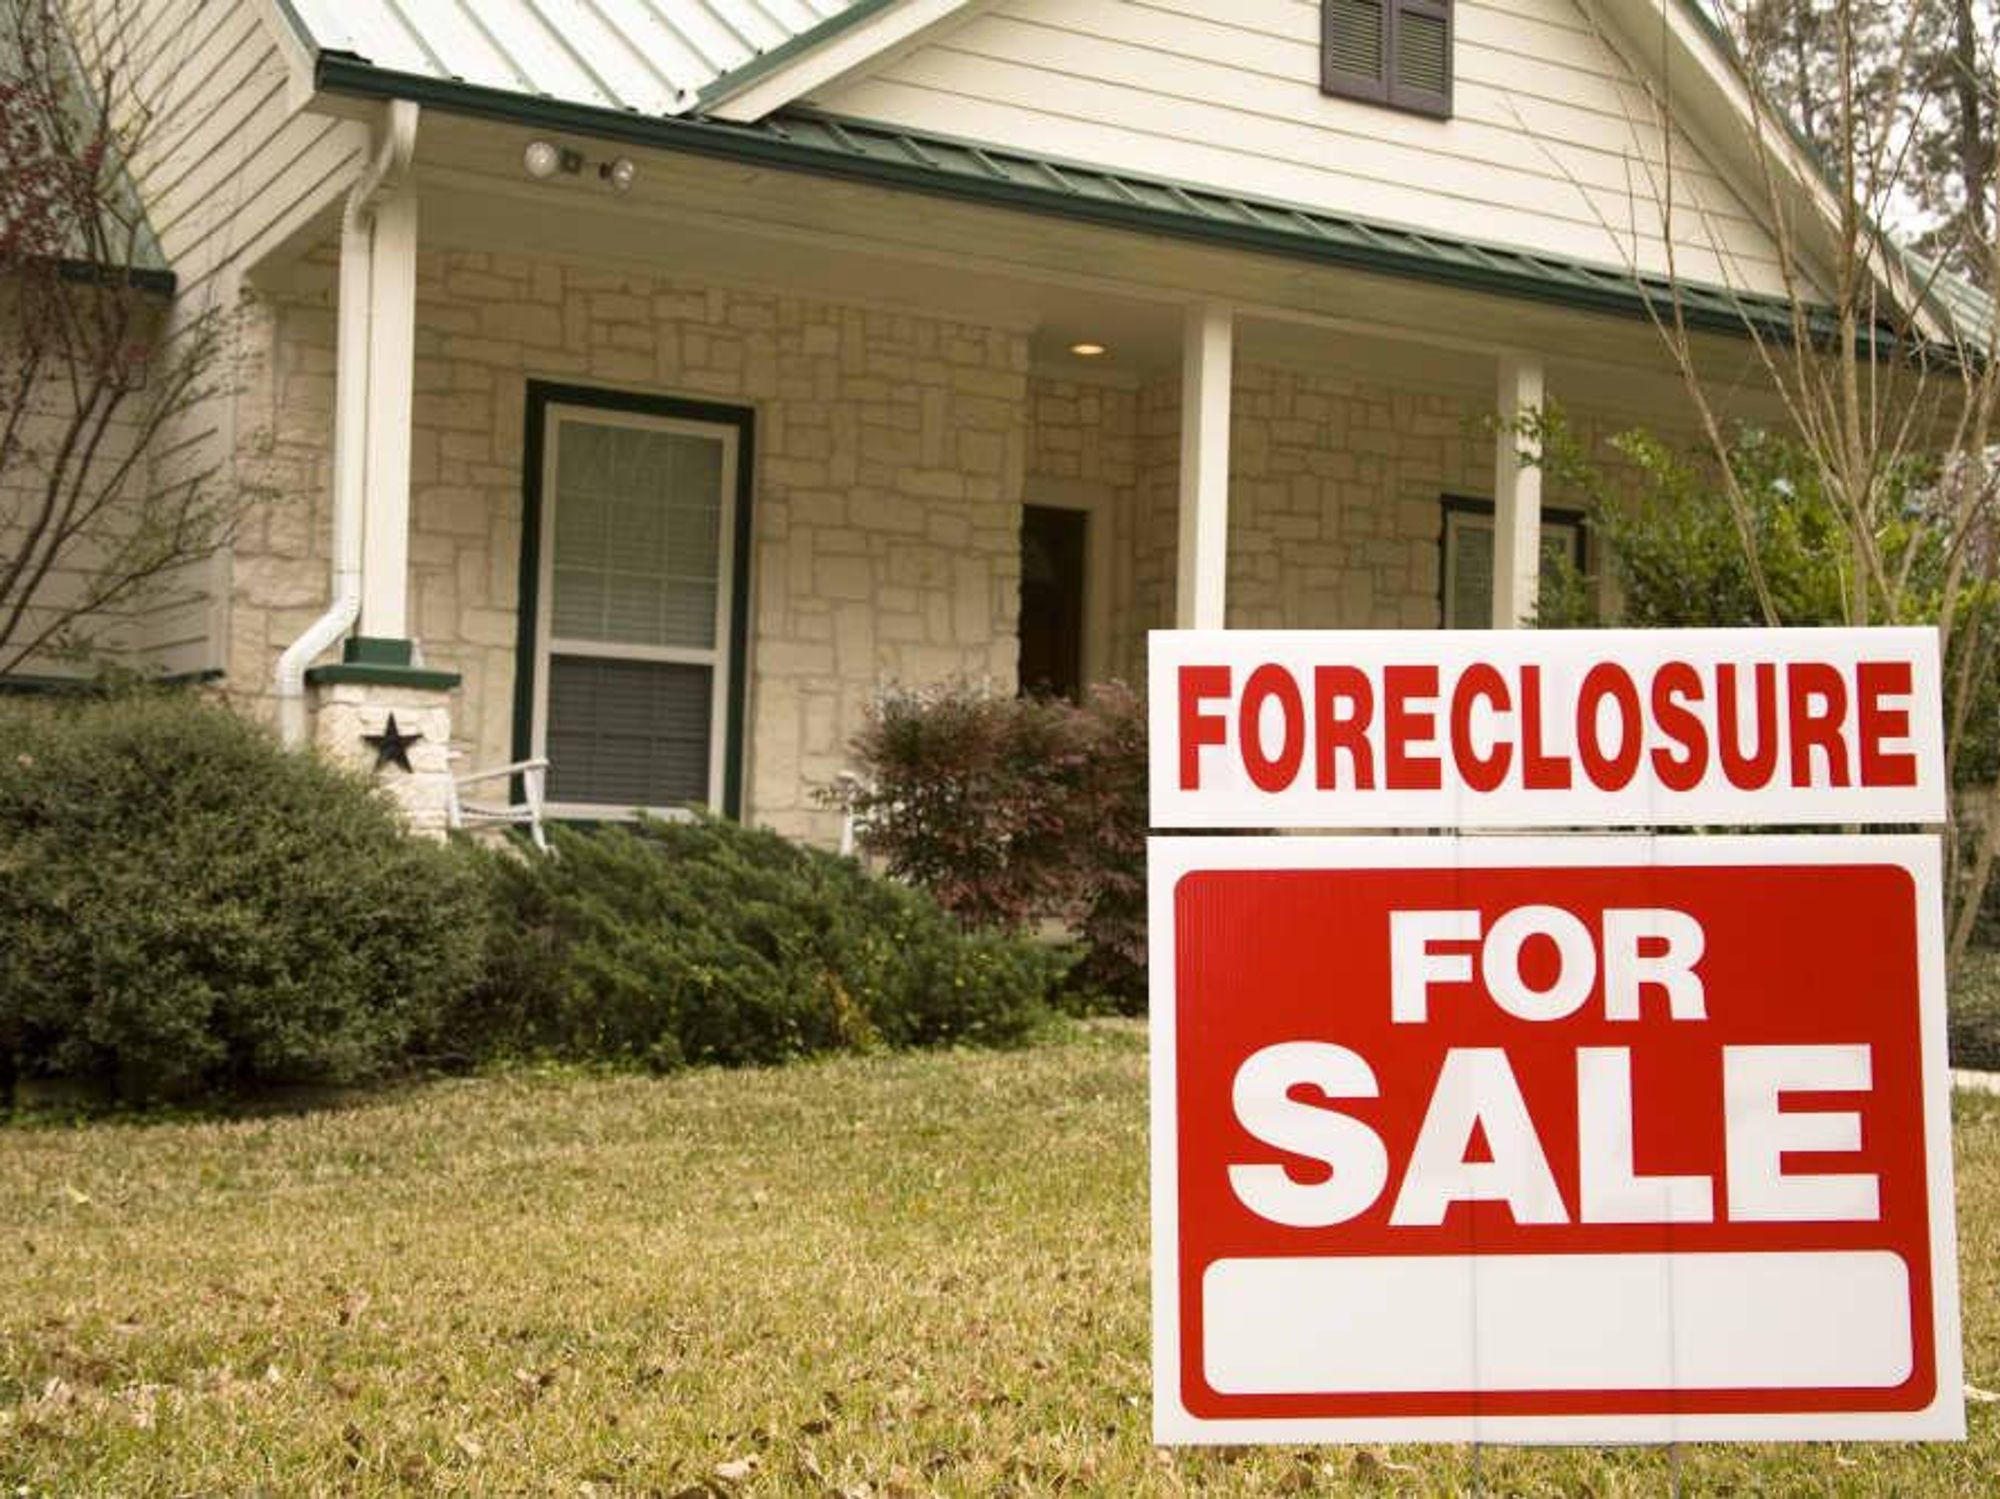 Foreclosure sign on house